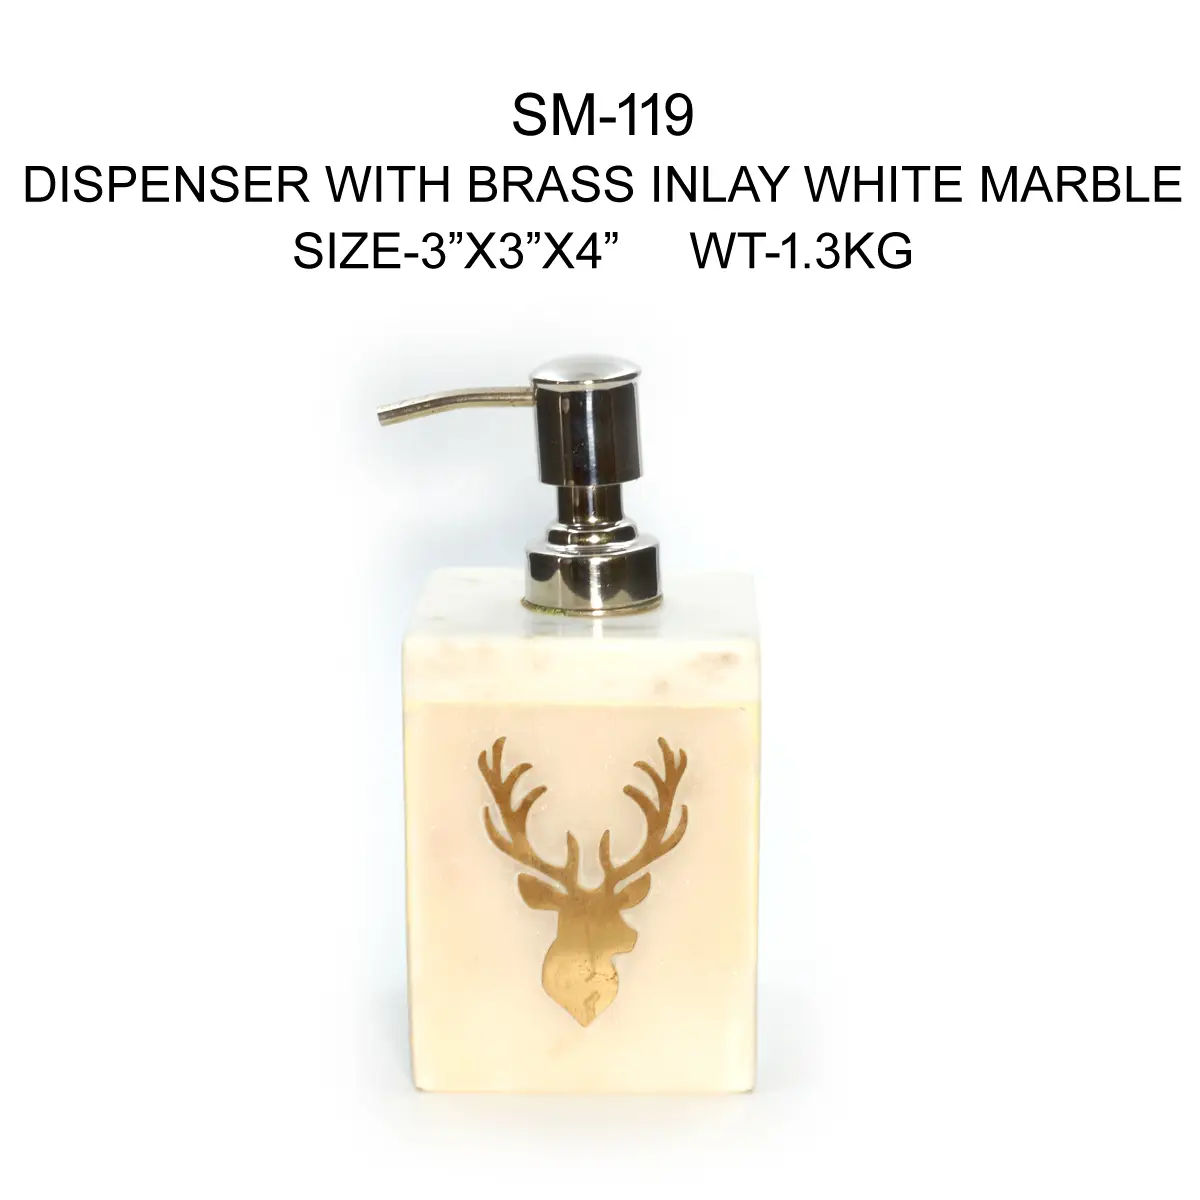 DISPENSER WITH BRASS REINDEER INLAY WHITE
MARBLE